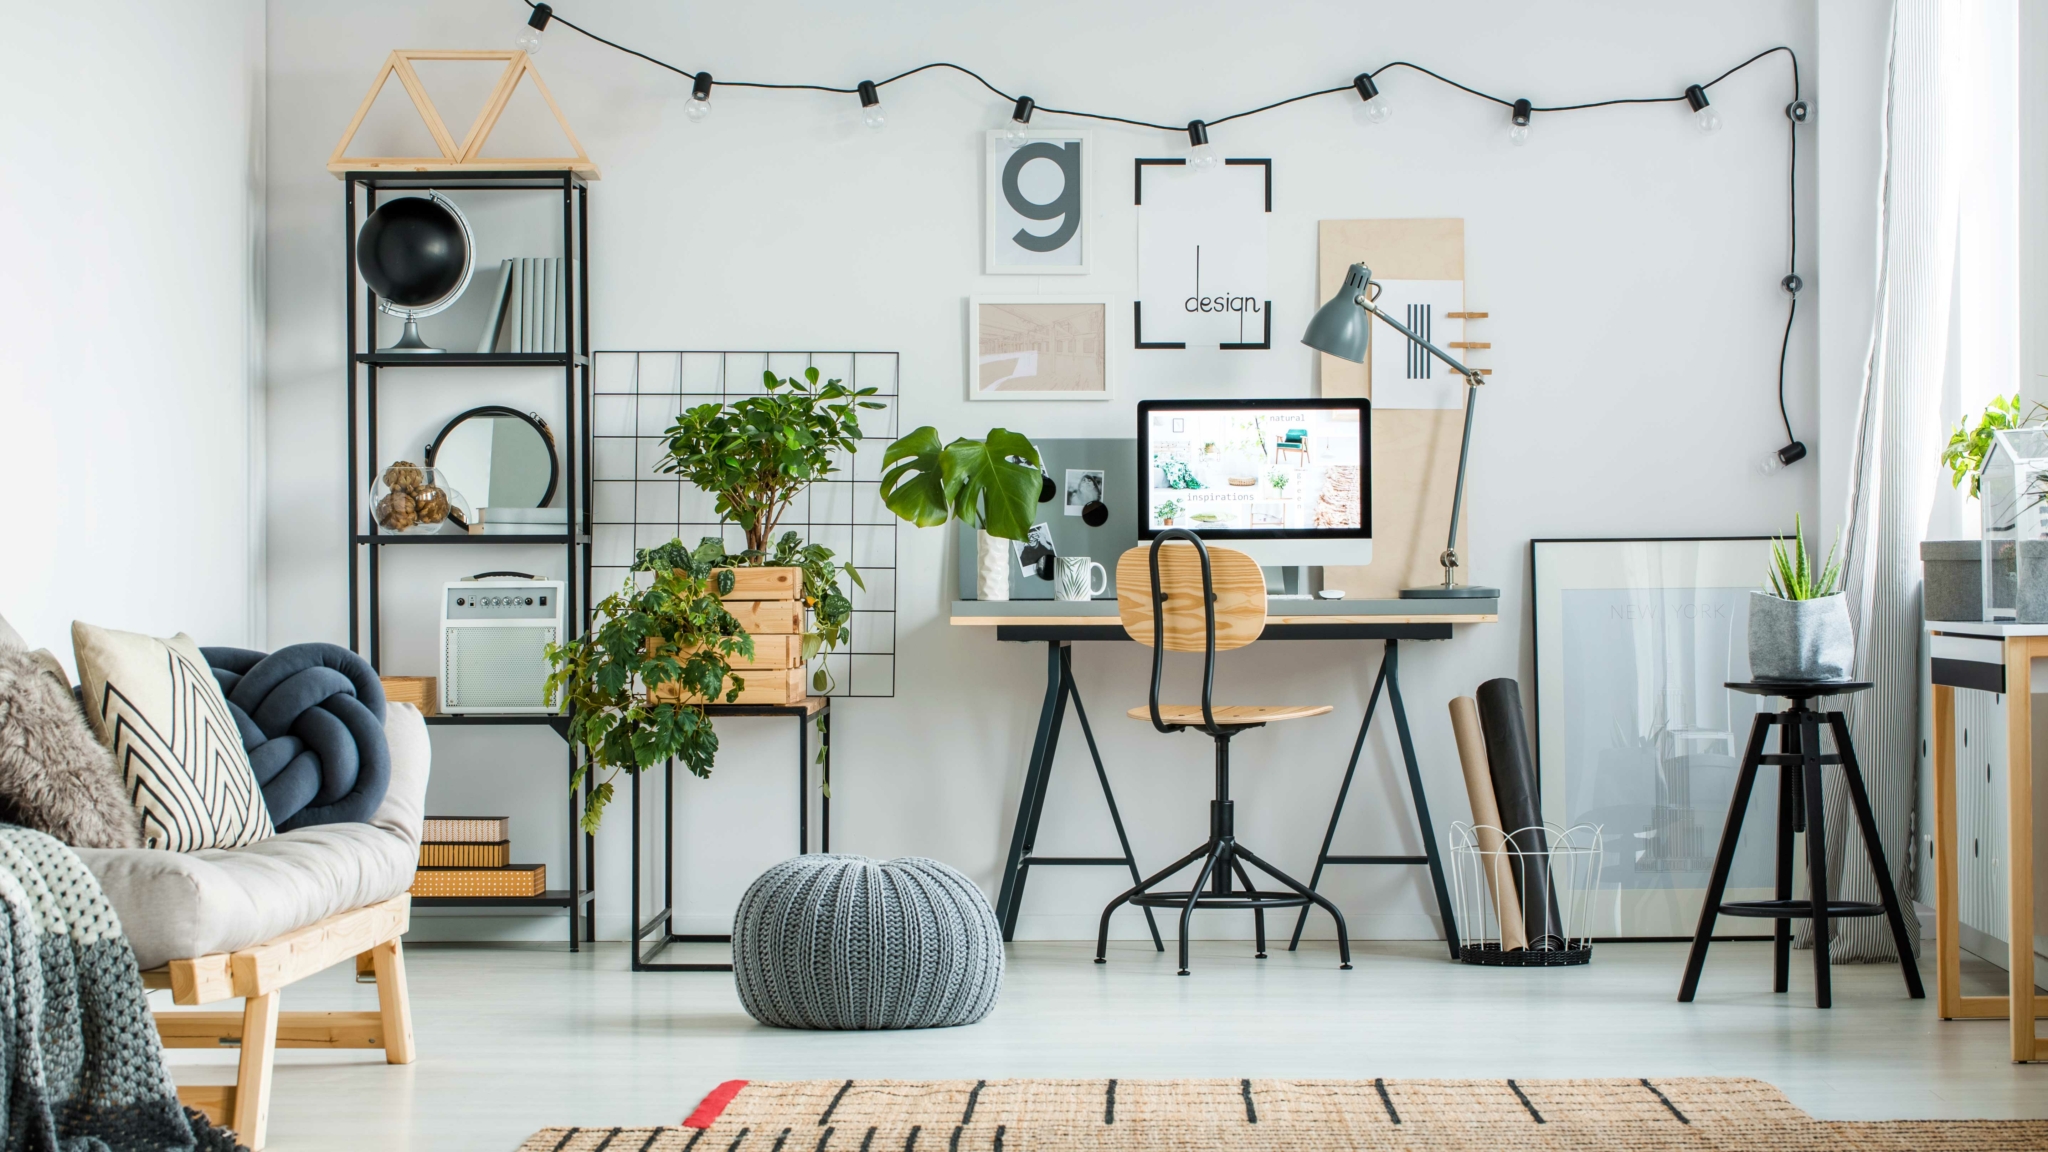 8 Best Office Decor Ideas To Design Your Workplace & Home Office